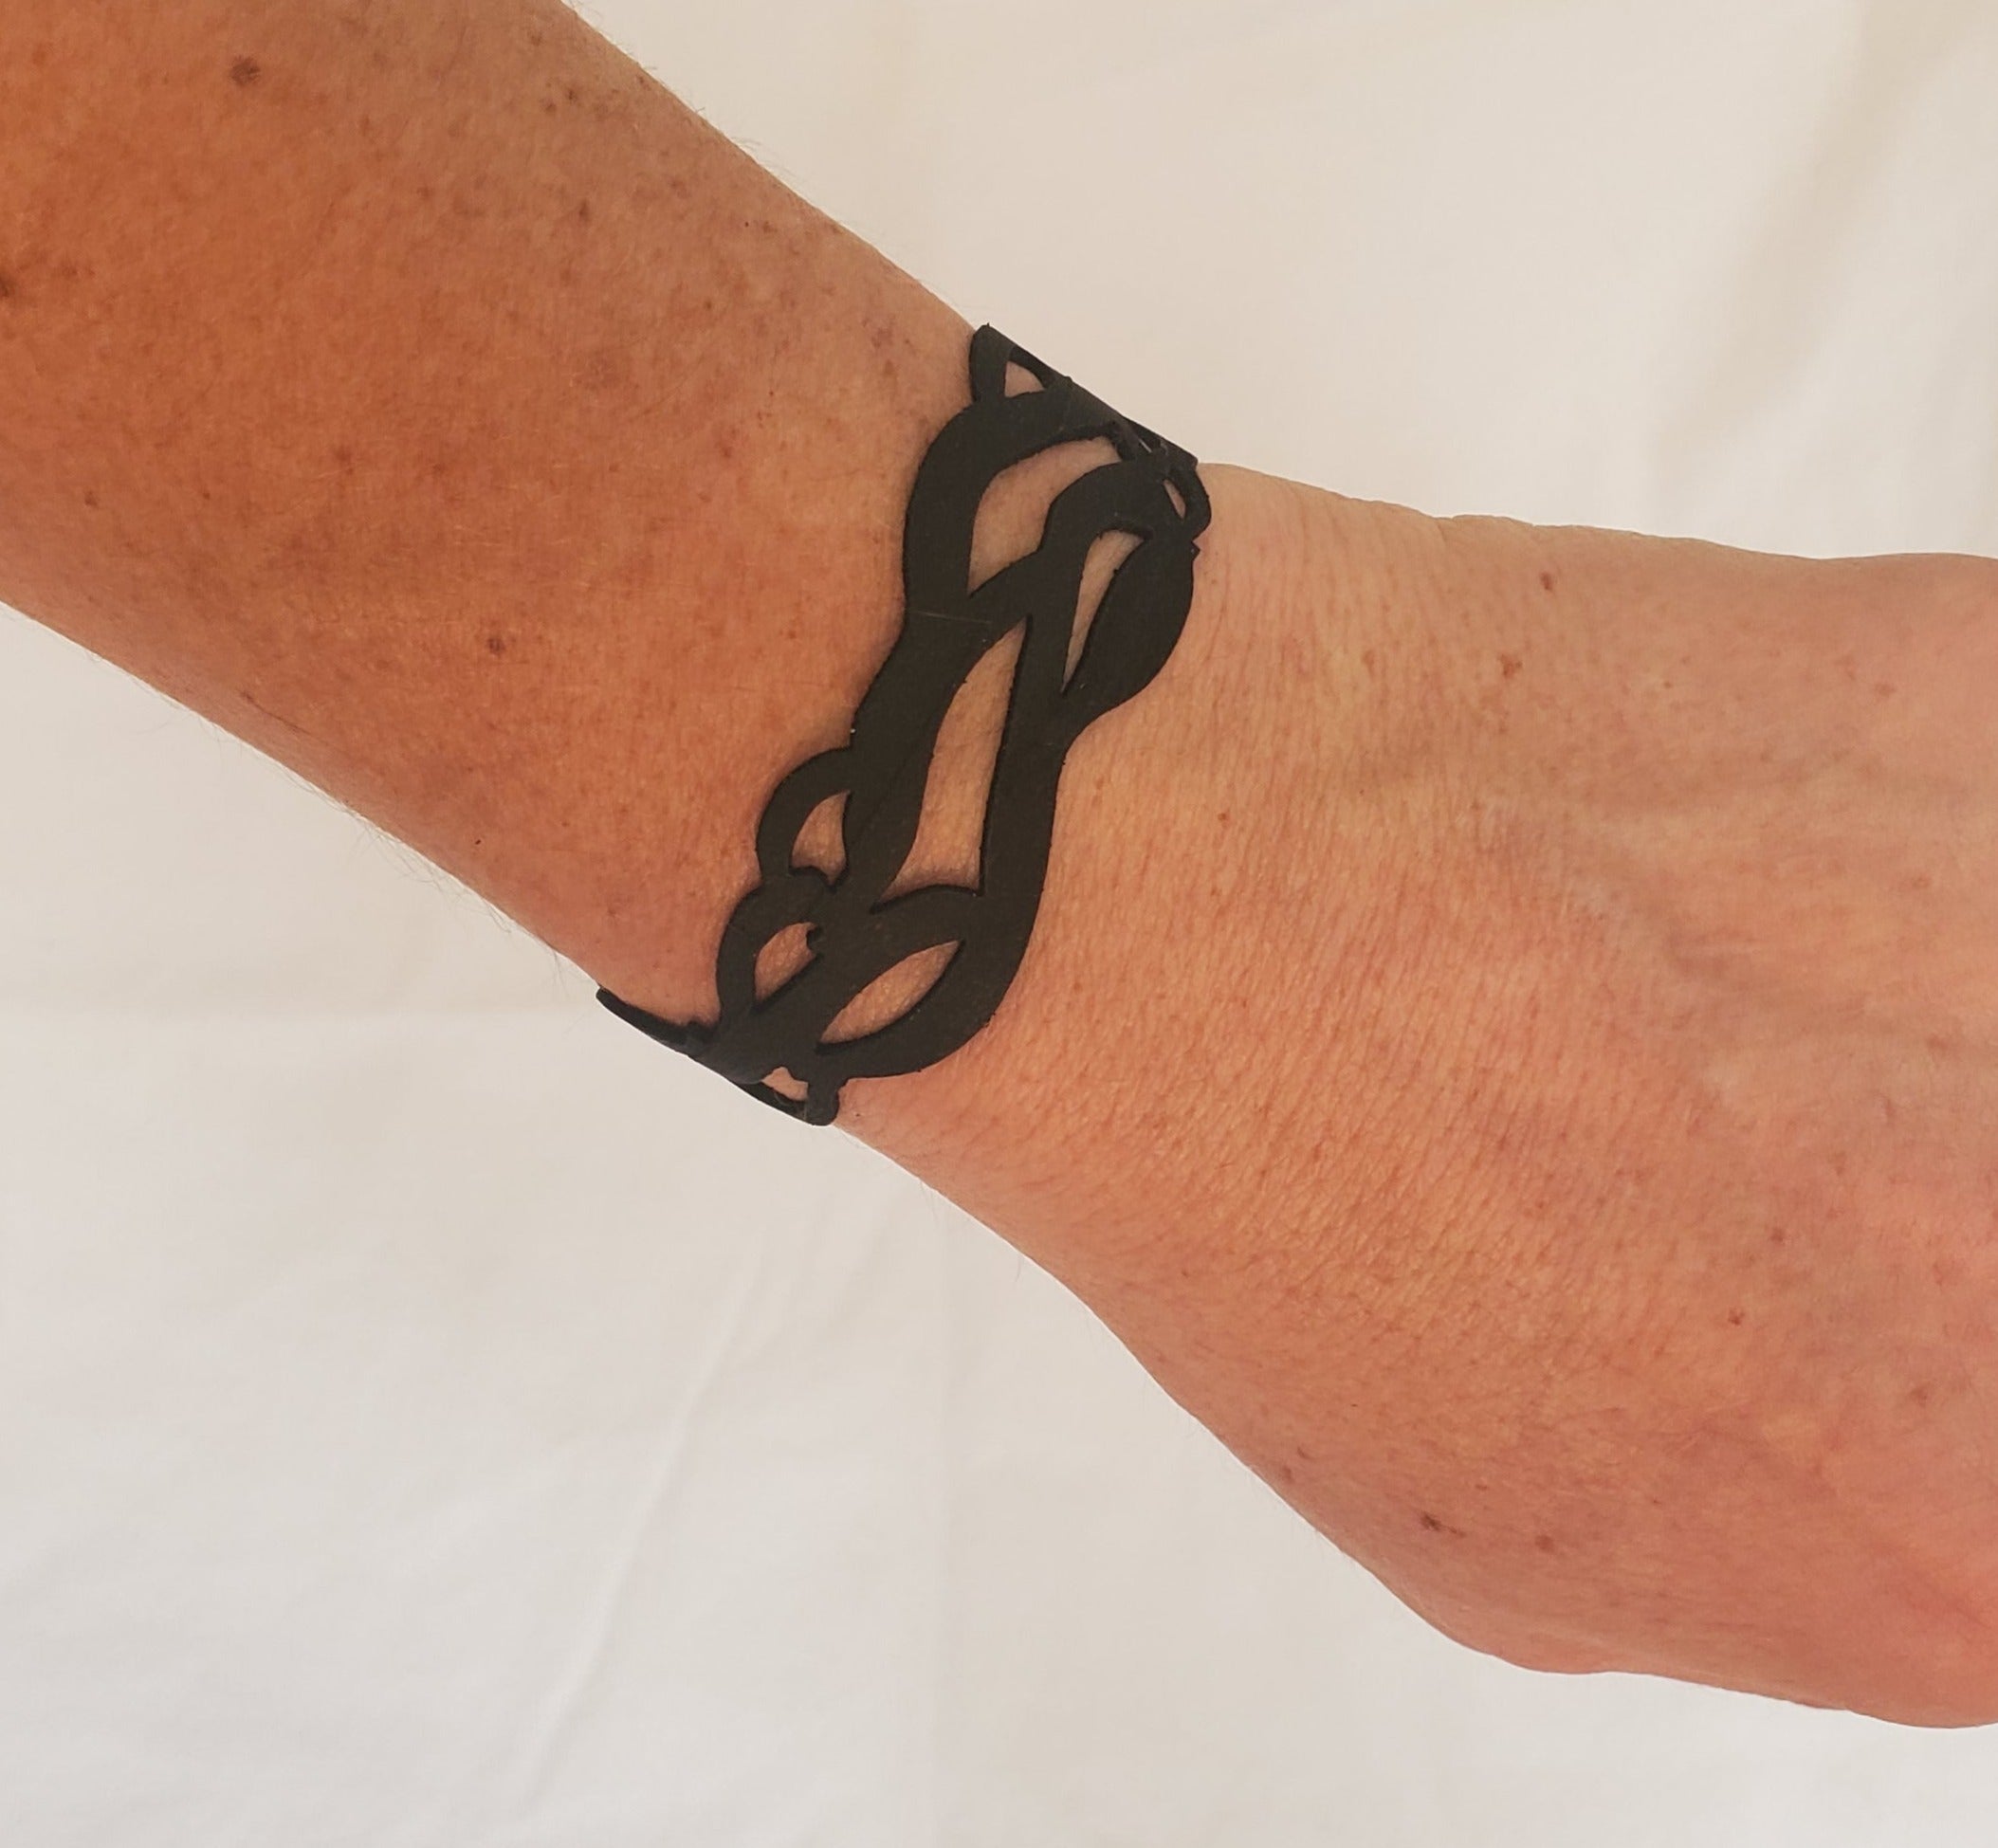 Salmon River inspired bracelet. Made from bike inner tube rubber, it is waterproof, lightweight and comfortable.